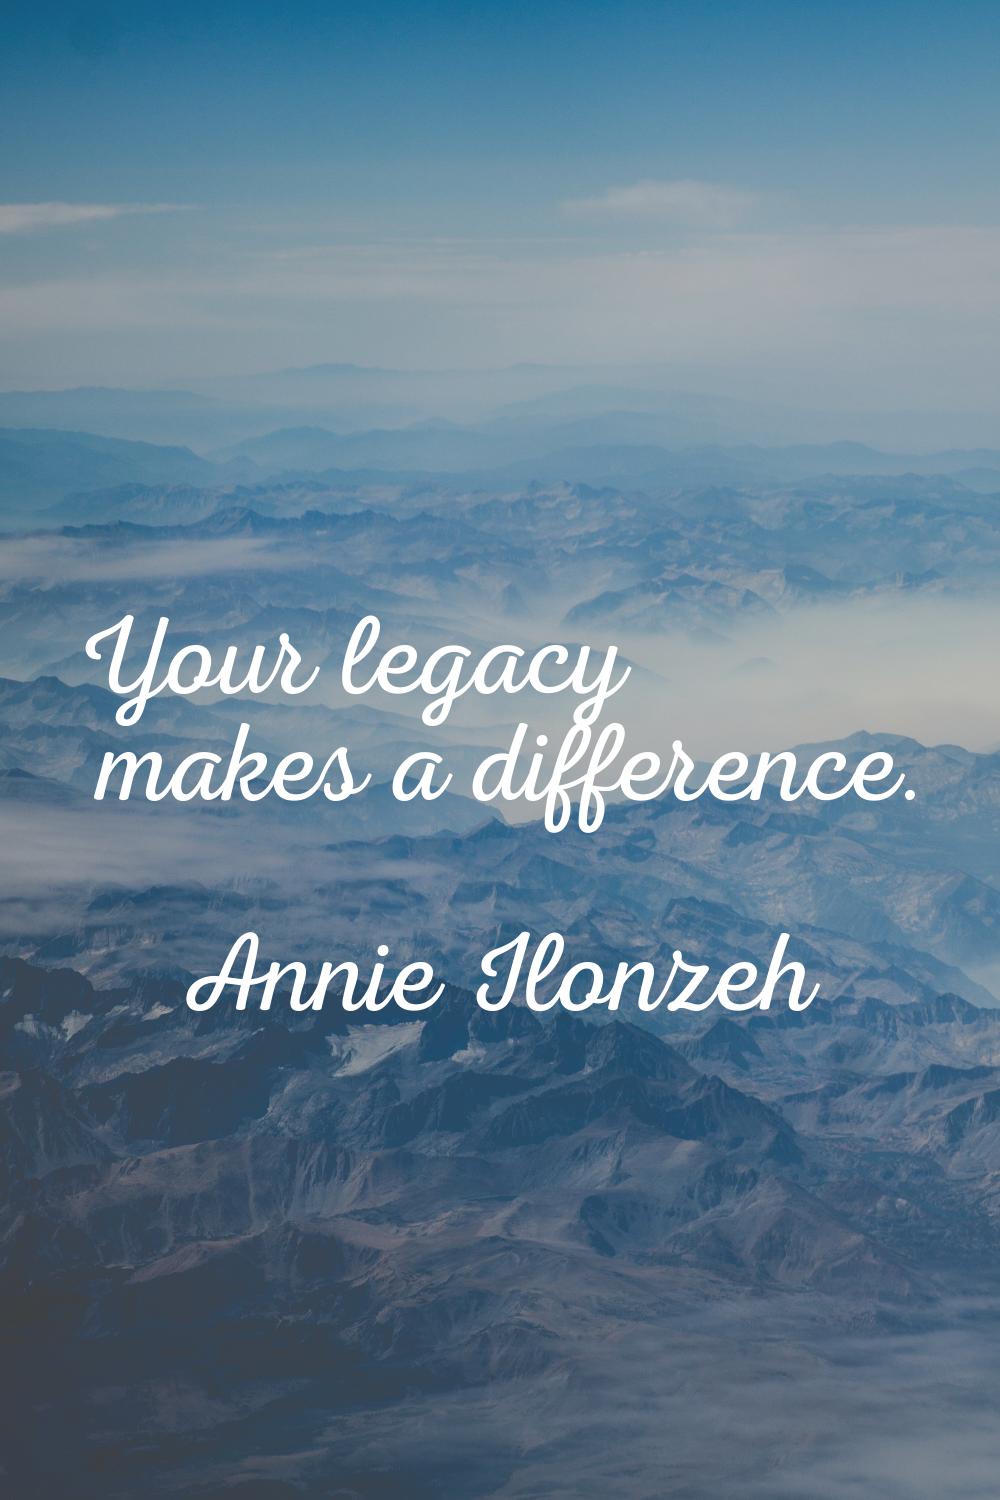 Your legacy makes a difference.